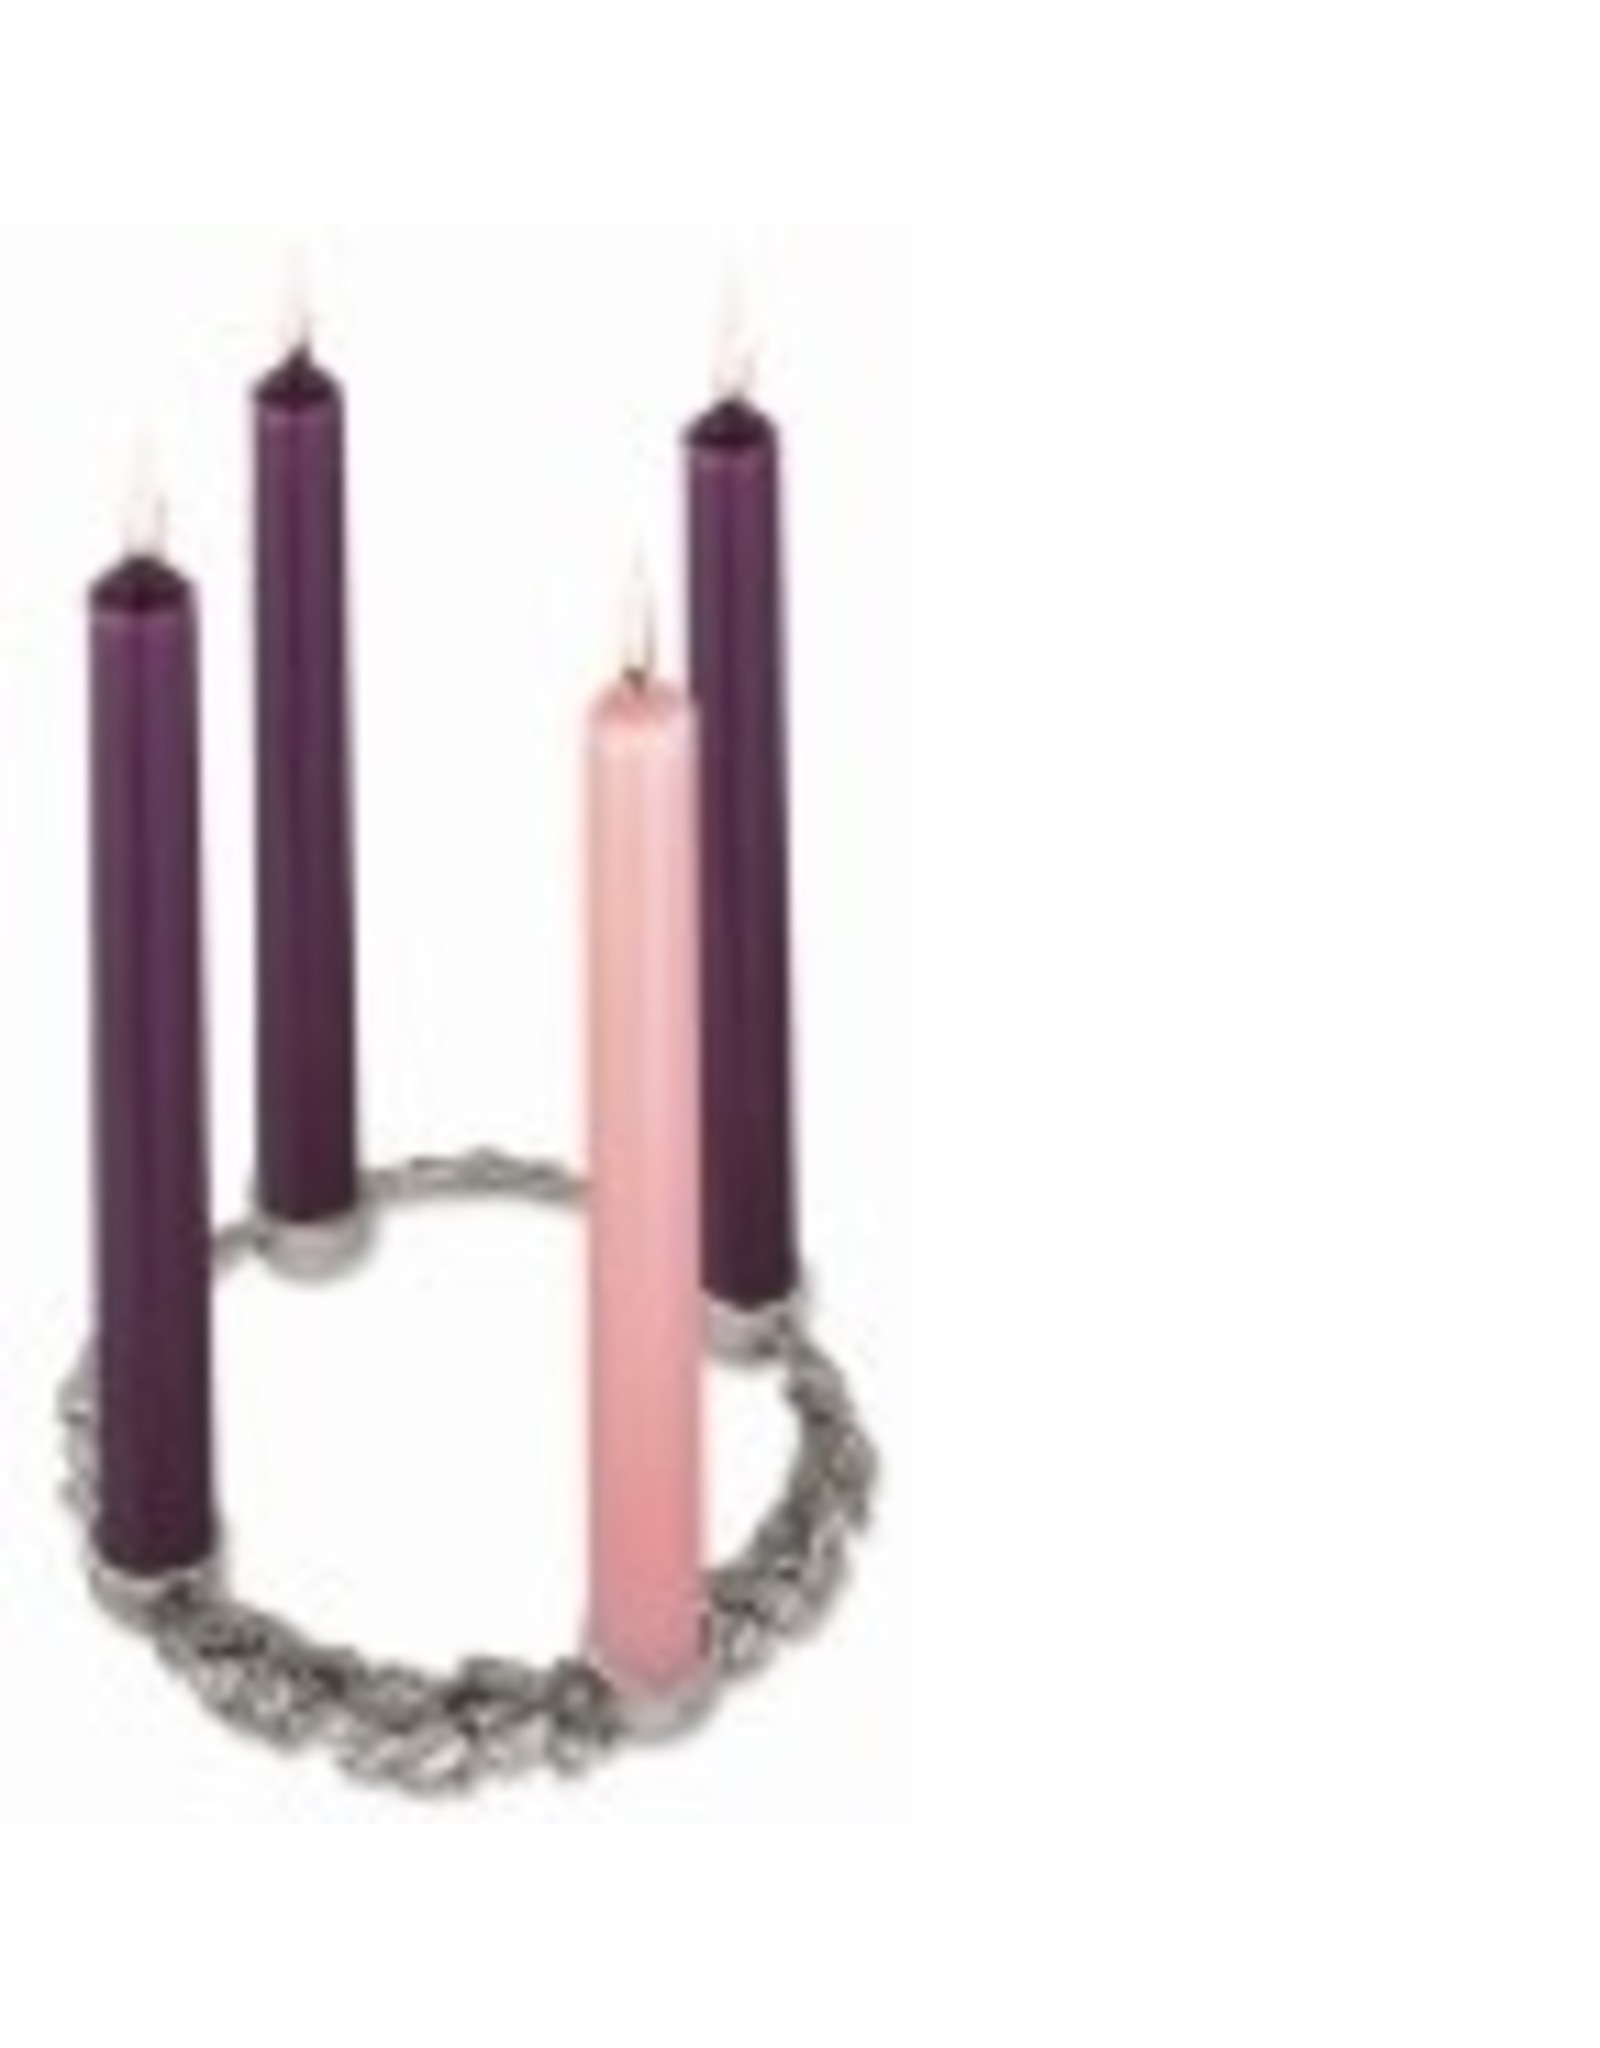 Cathedral Art Holly and Ivy Advent Wreath, 7" with Set of 4 Candles